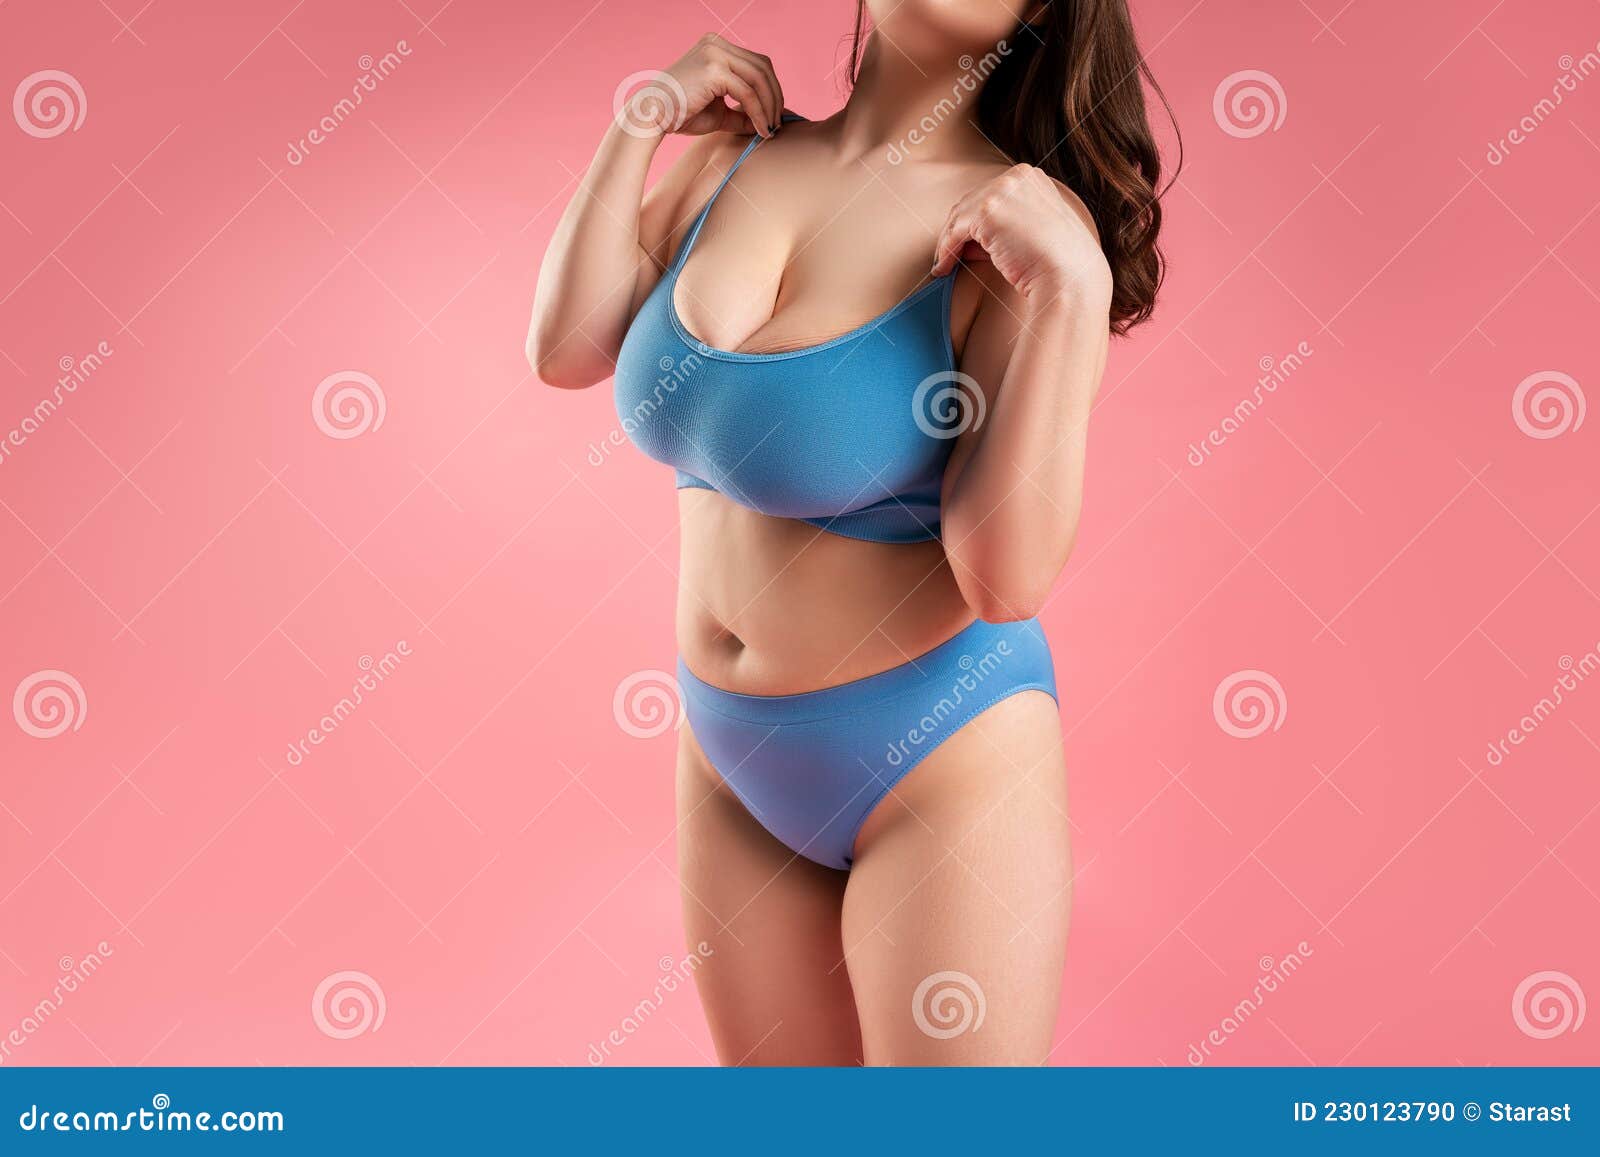 Fat Woman with Very Large Breasts in Blue Underwear on Pink